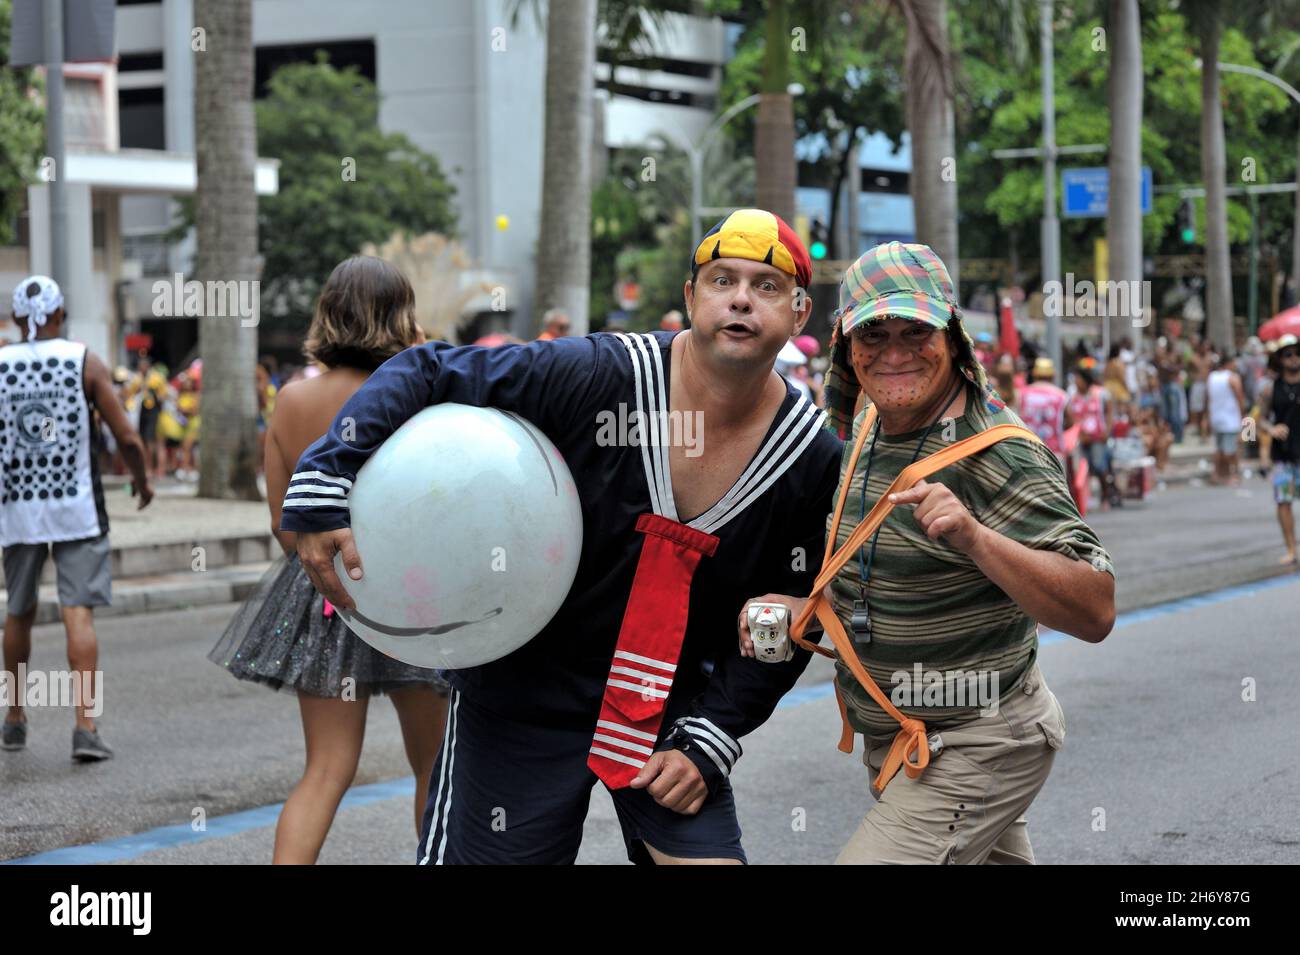 Brazil - February 22, 2020: Revelers dressed up as El Chavo television sitcom characters perform during a Carnival street party held in Rio de Janeiro Stock Photo